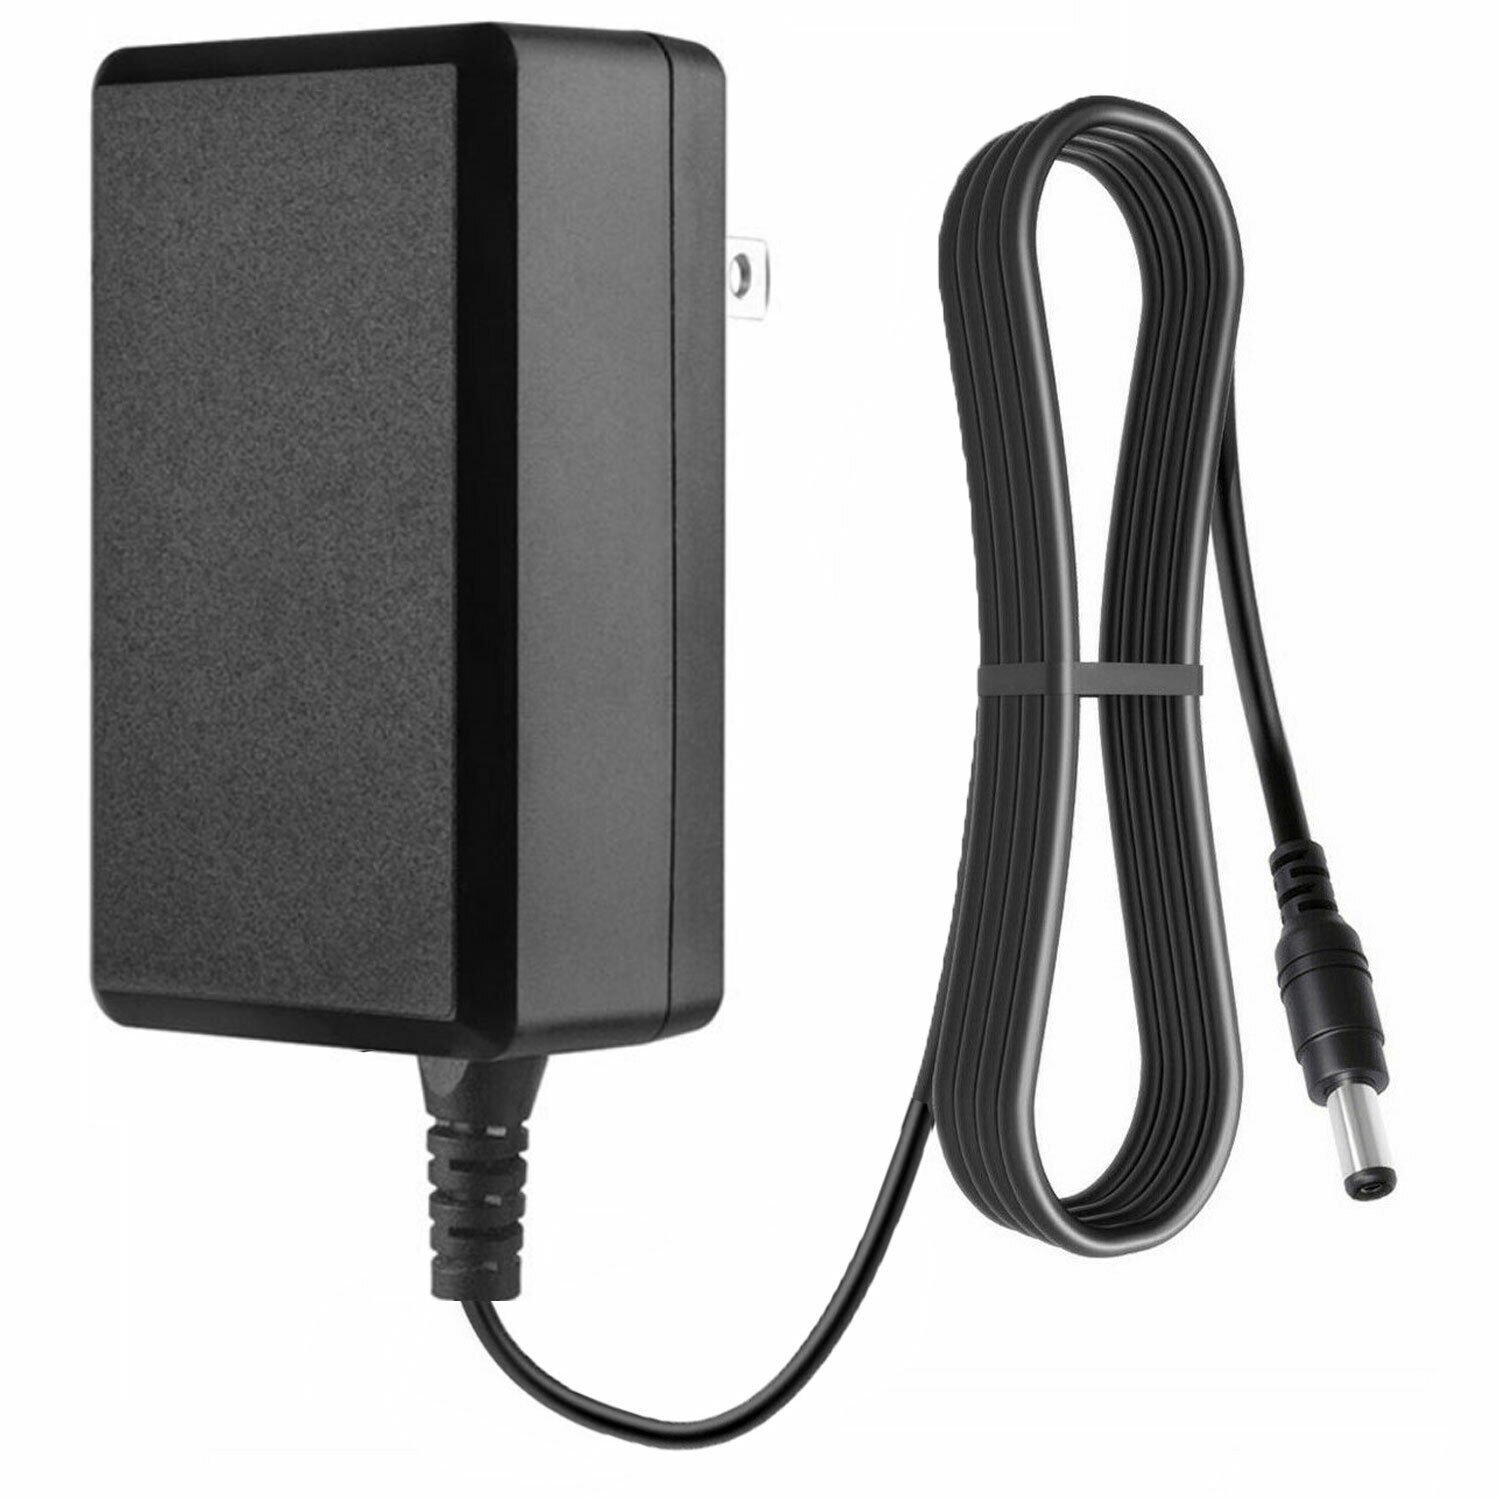 Genuine Cal-Comp (R1613) 30V 400mA 12VA 60Hz AC Adapter Power Supply Charger Country/Region of Manufacture China Bundle